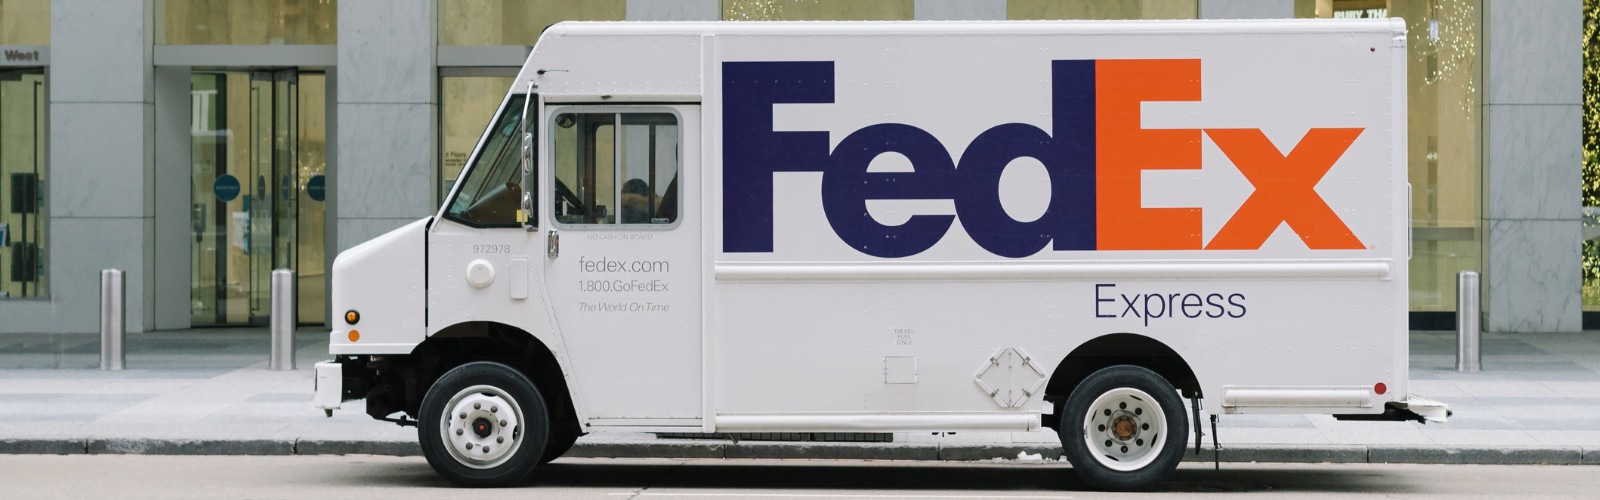 FedEx combines Ground and Express